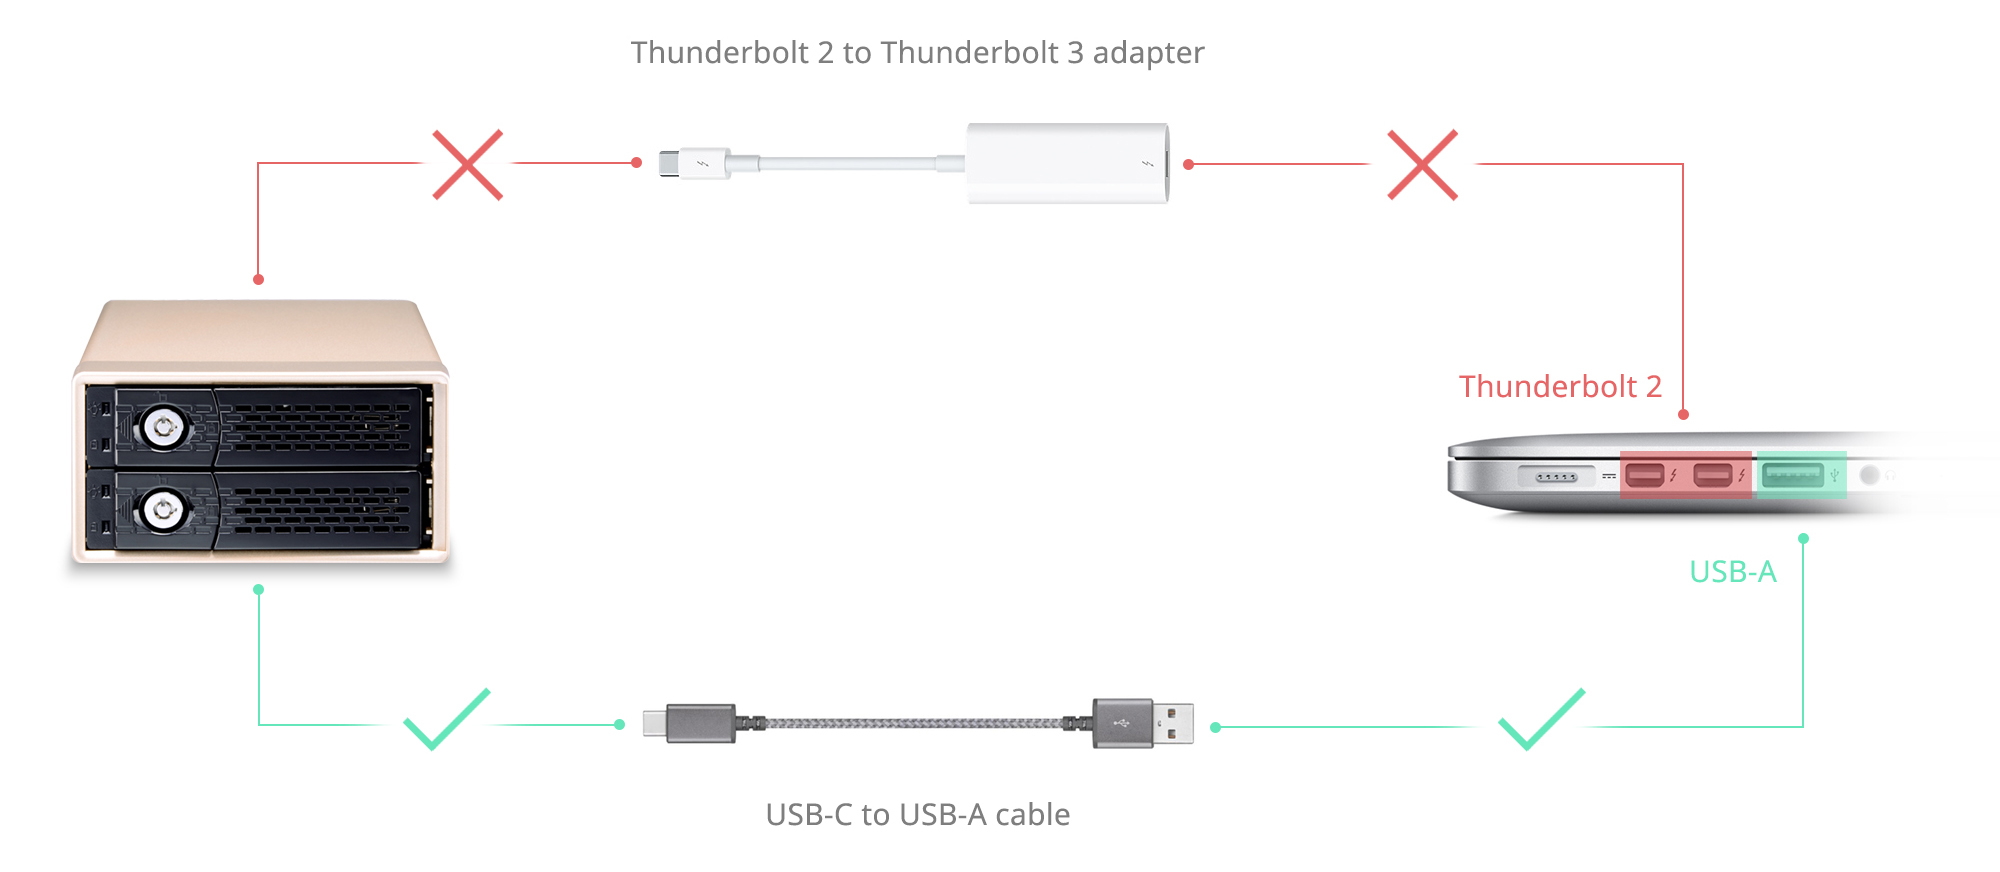 How NA460C connect to thunderbolt 2 pc